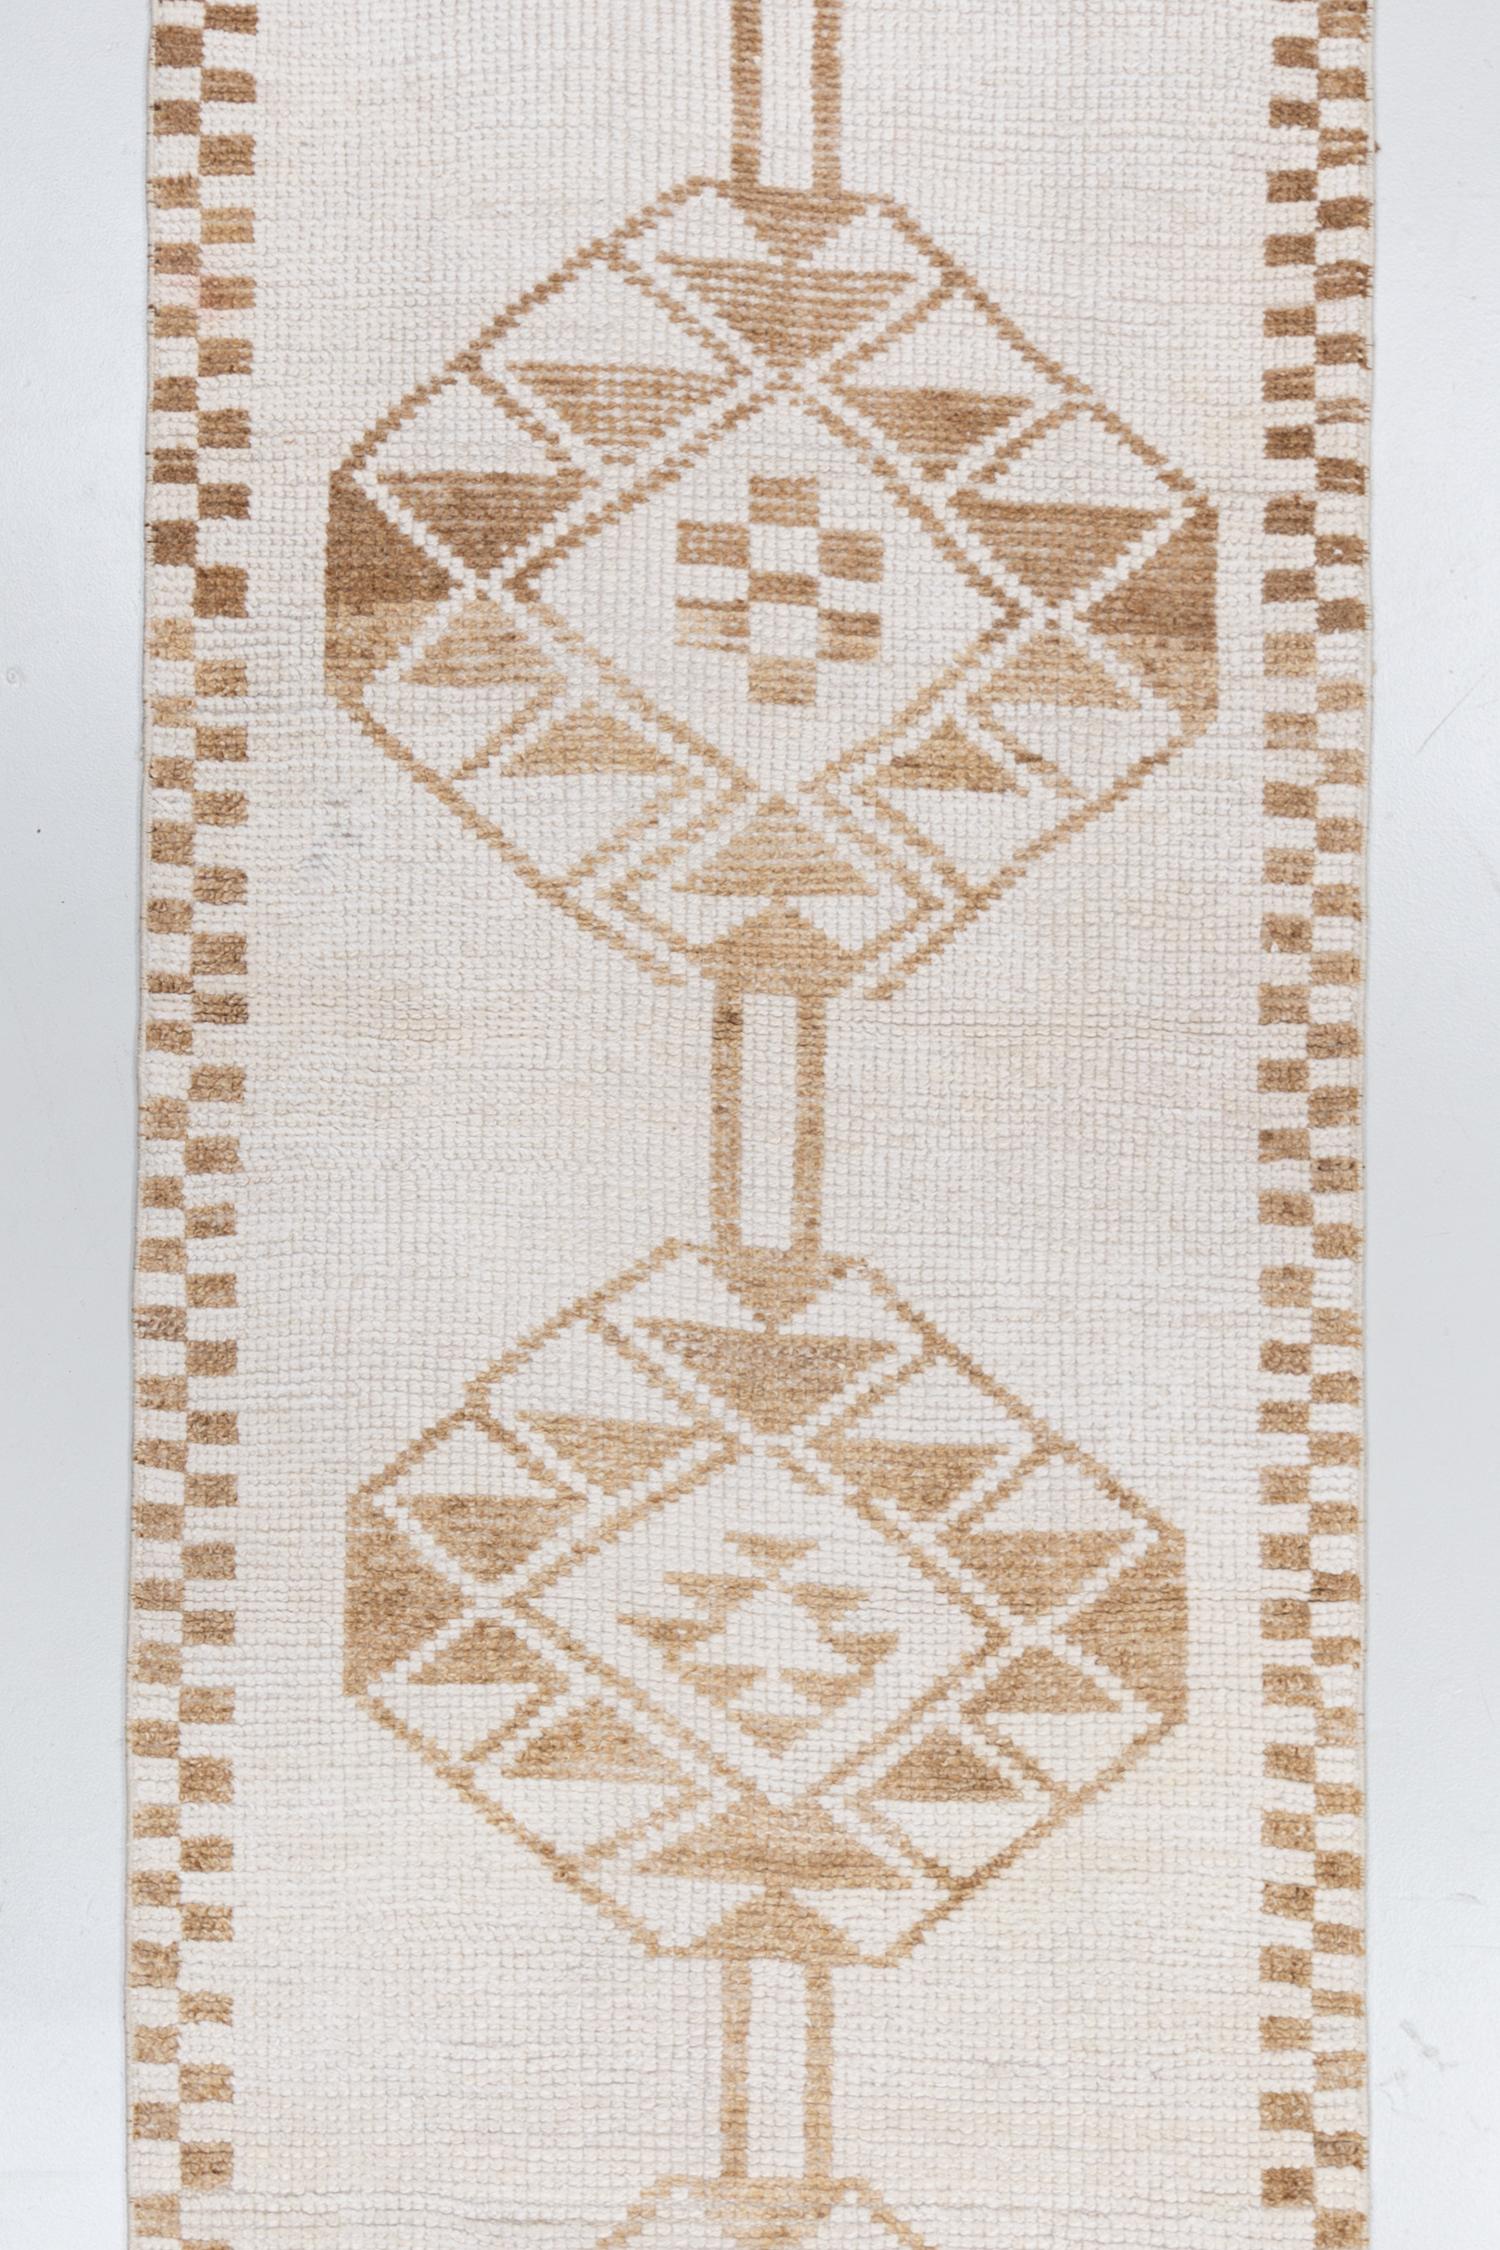 Wool on wool foundation with a soft pile, this vintage Turkish runner has a fun checkerboard border and great off white field. 

Wear Guide: 1

Wear Notes:
Vintage and antique rugs are by nature, pre-loved and may show evidence of their past.